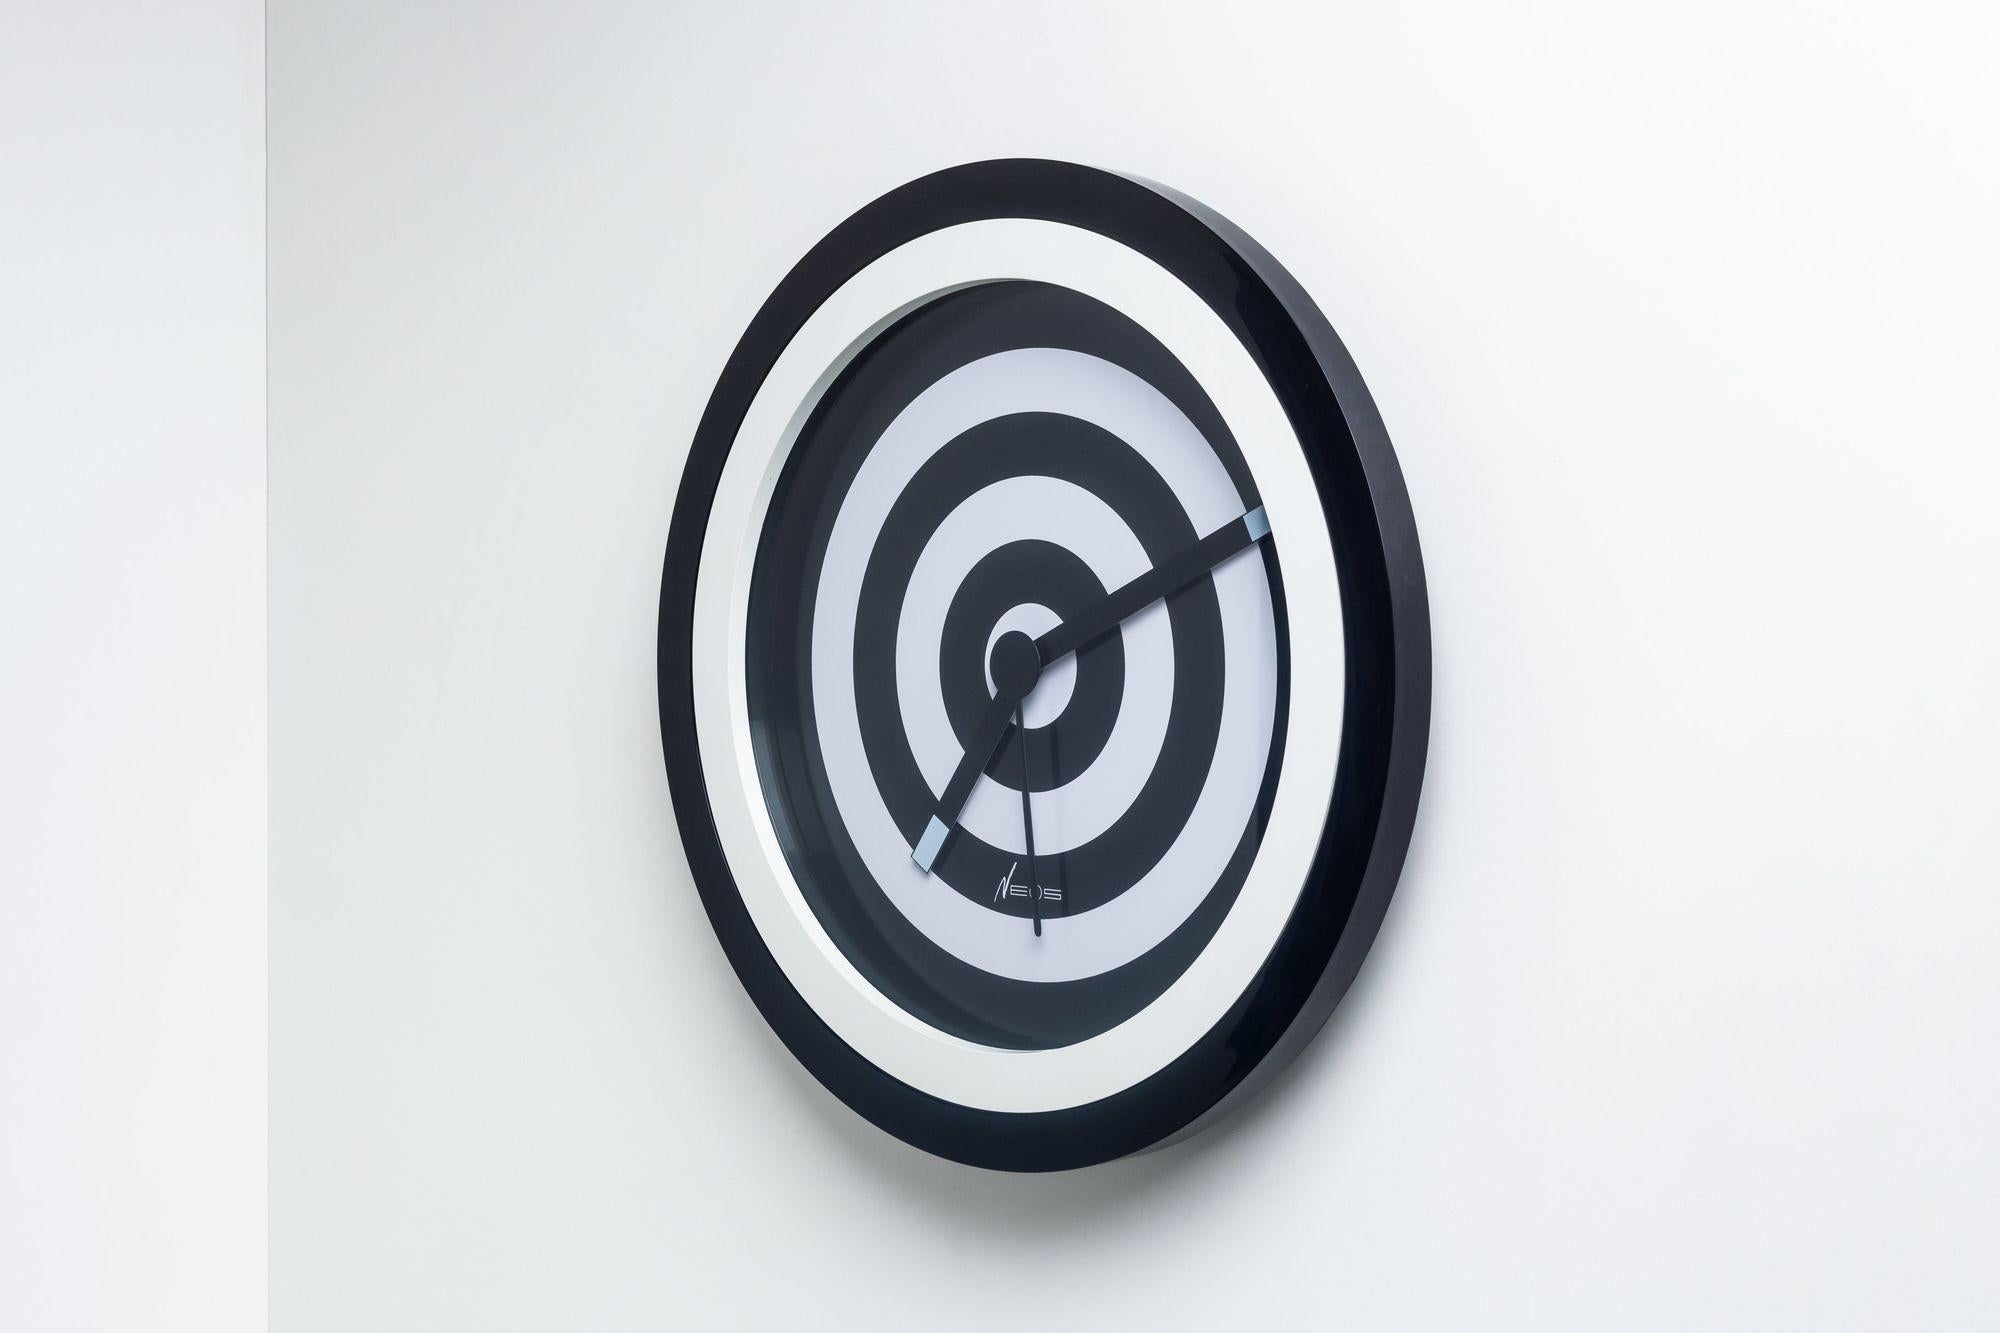 Neos Lorenz du Pasquier & Sowden Postmodern Clock
A black and white, bullseye-like design plastic postmodern wall clock with yellow hands and numbers designed by Nathalie du Pasquier and George Sowden for Neos of Lorenz in the late 1980s.